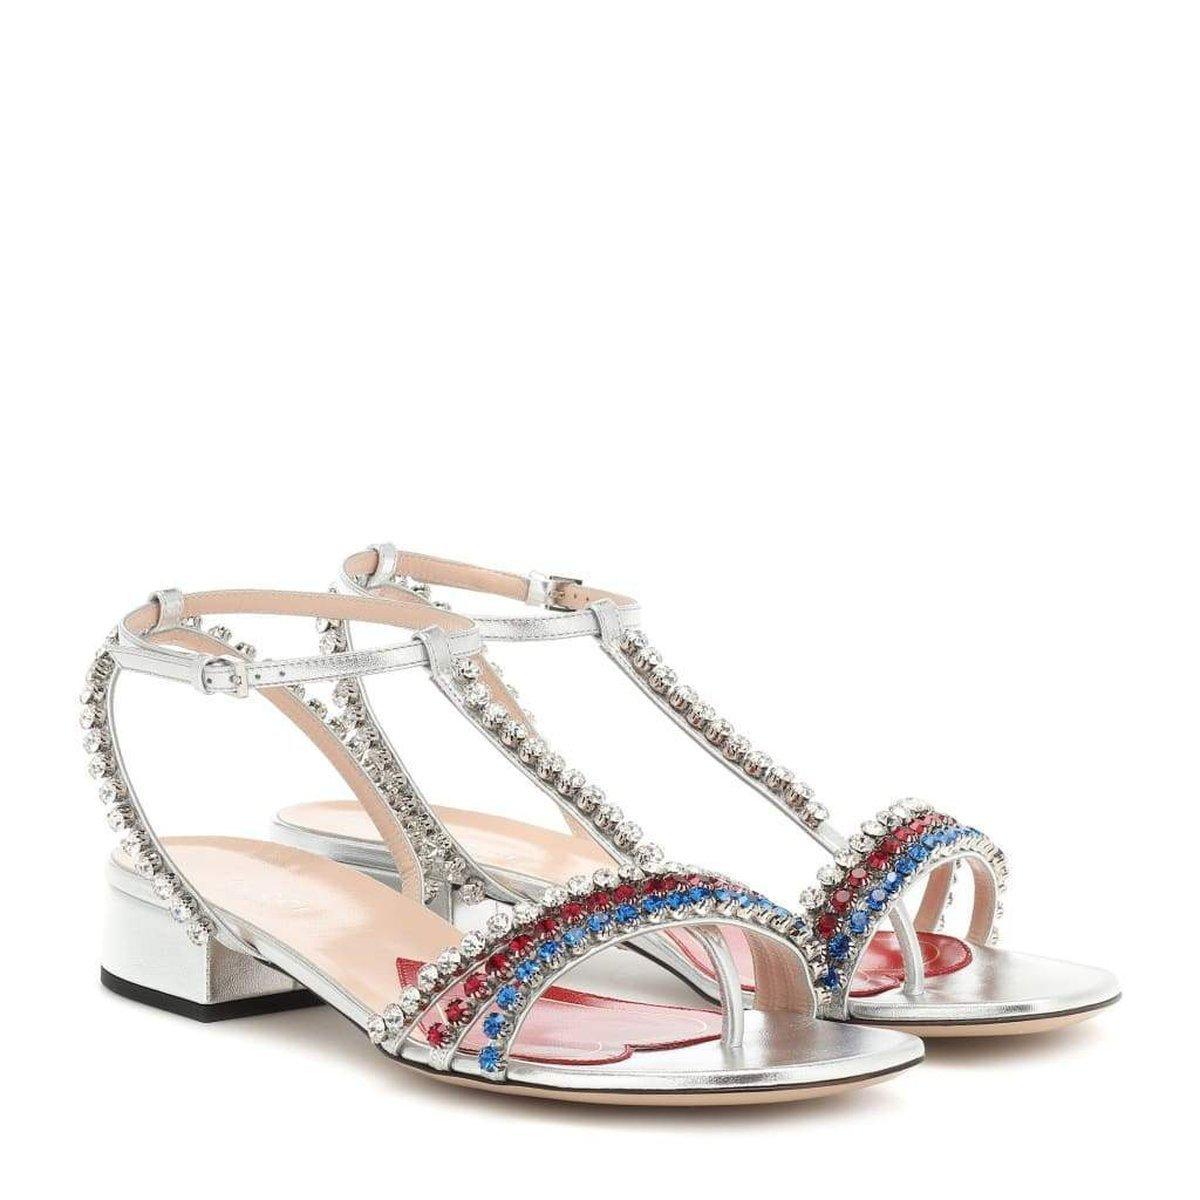 Women's Gucci Bertie Embellished Metallic Leather Sandals IT 37 For Sale